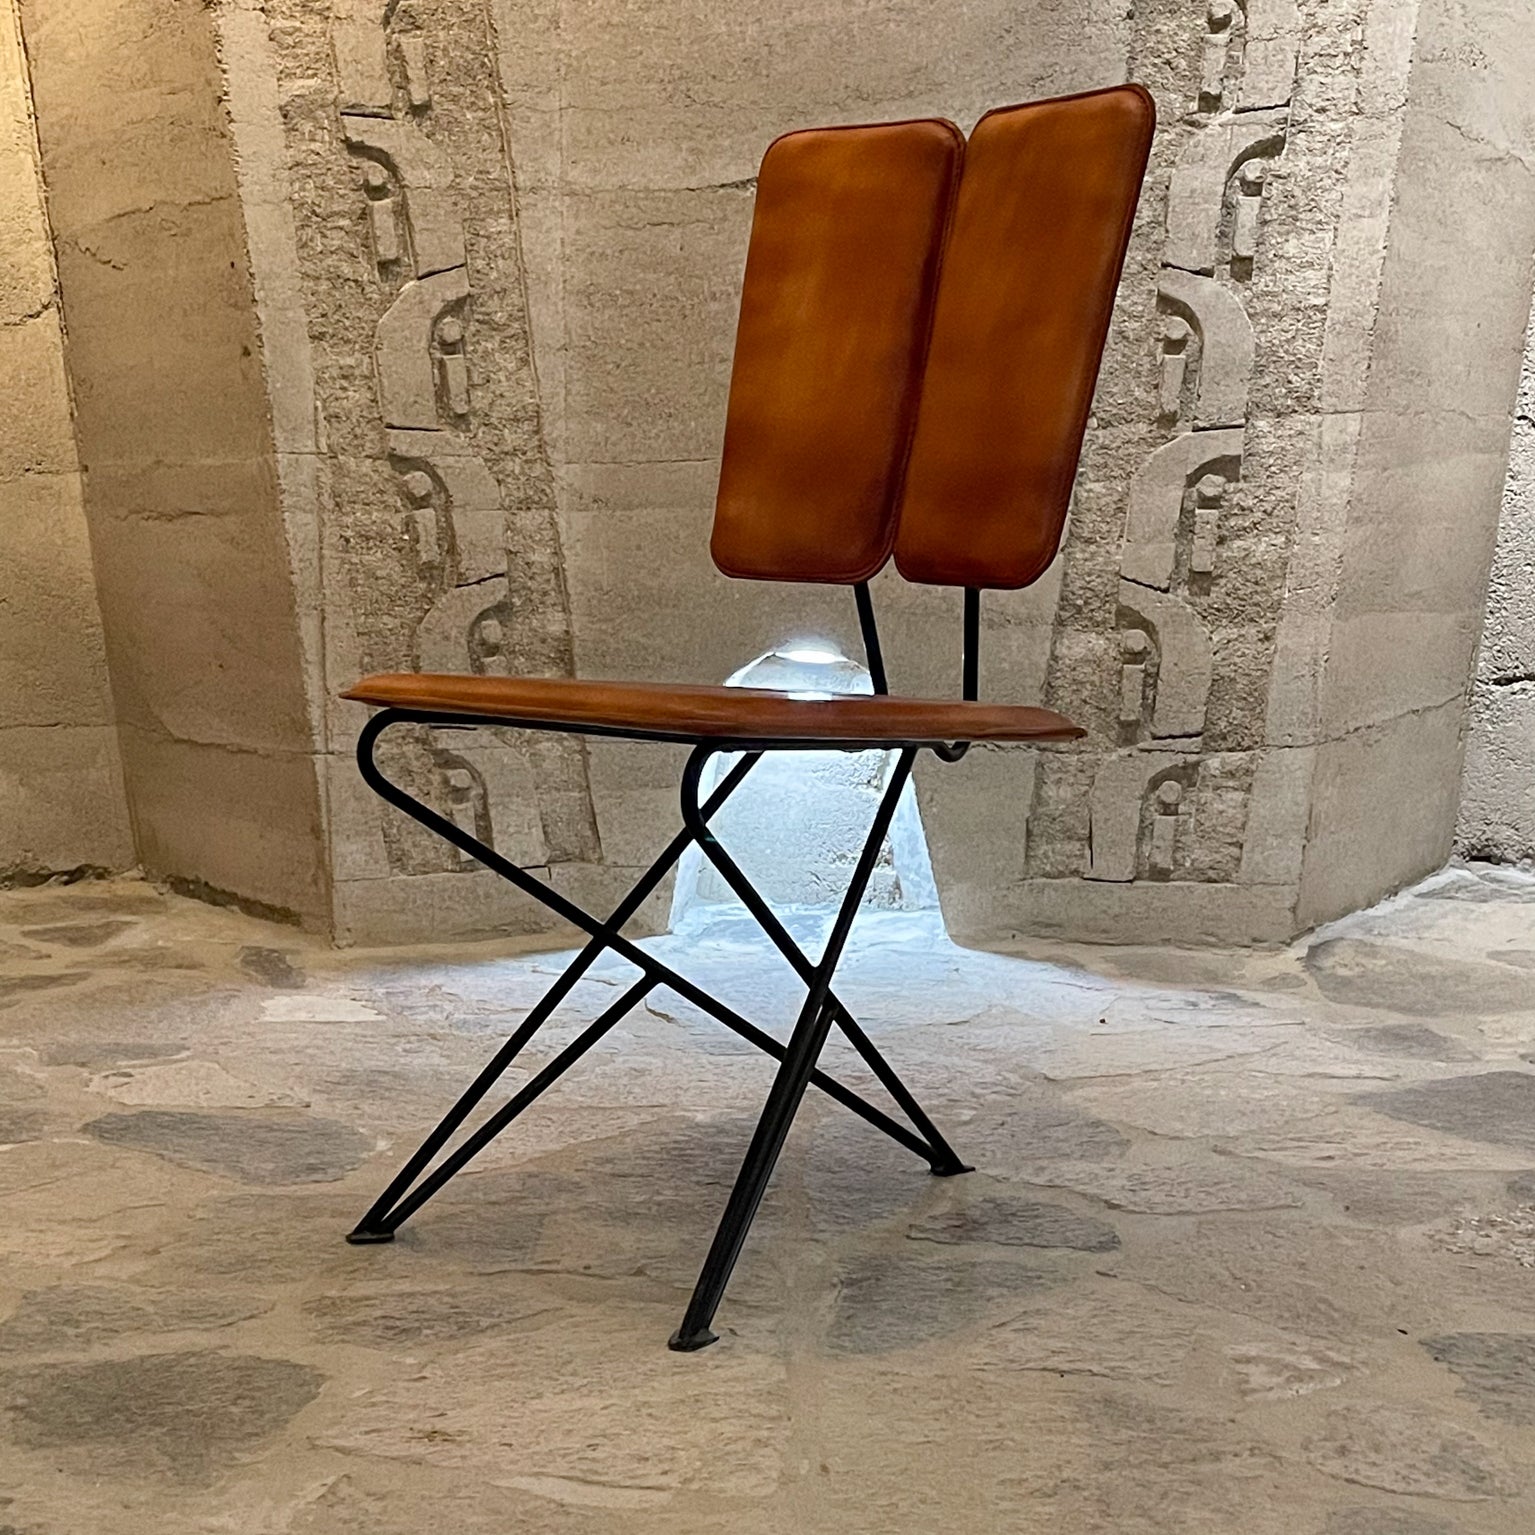 Pablex Iron & Leather Tripod Chair Pablo Romo for AMBIANIC midcentury inspired.
Custom built tripod chair with leather and bronze details.
Crafted in iron with leather cushions using a thick whipstitch design.
Sculpturally clean simple